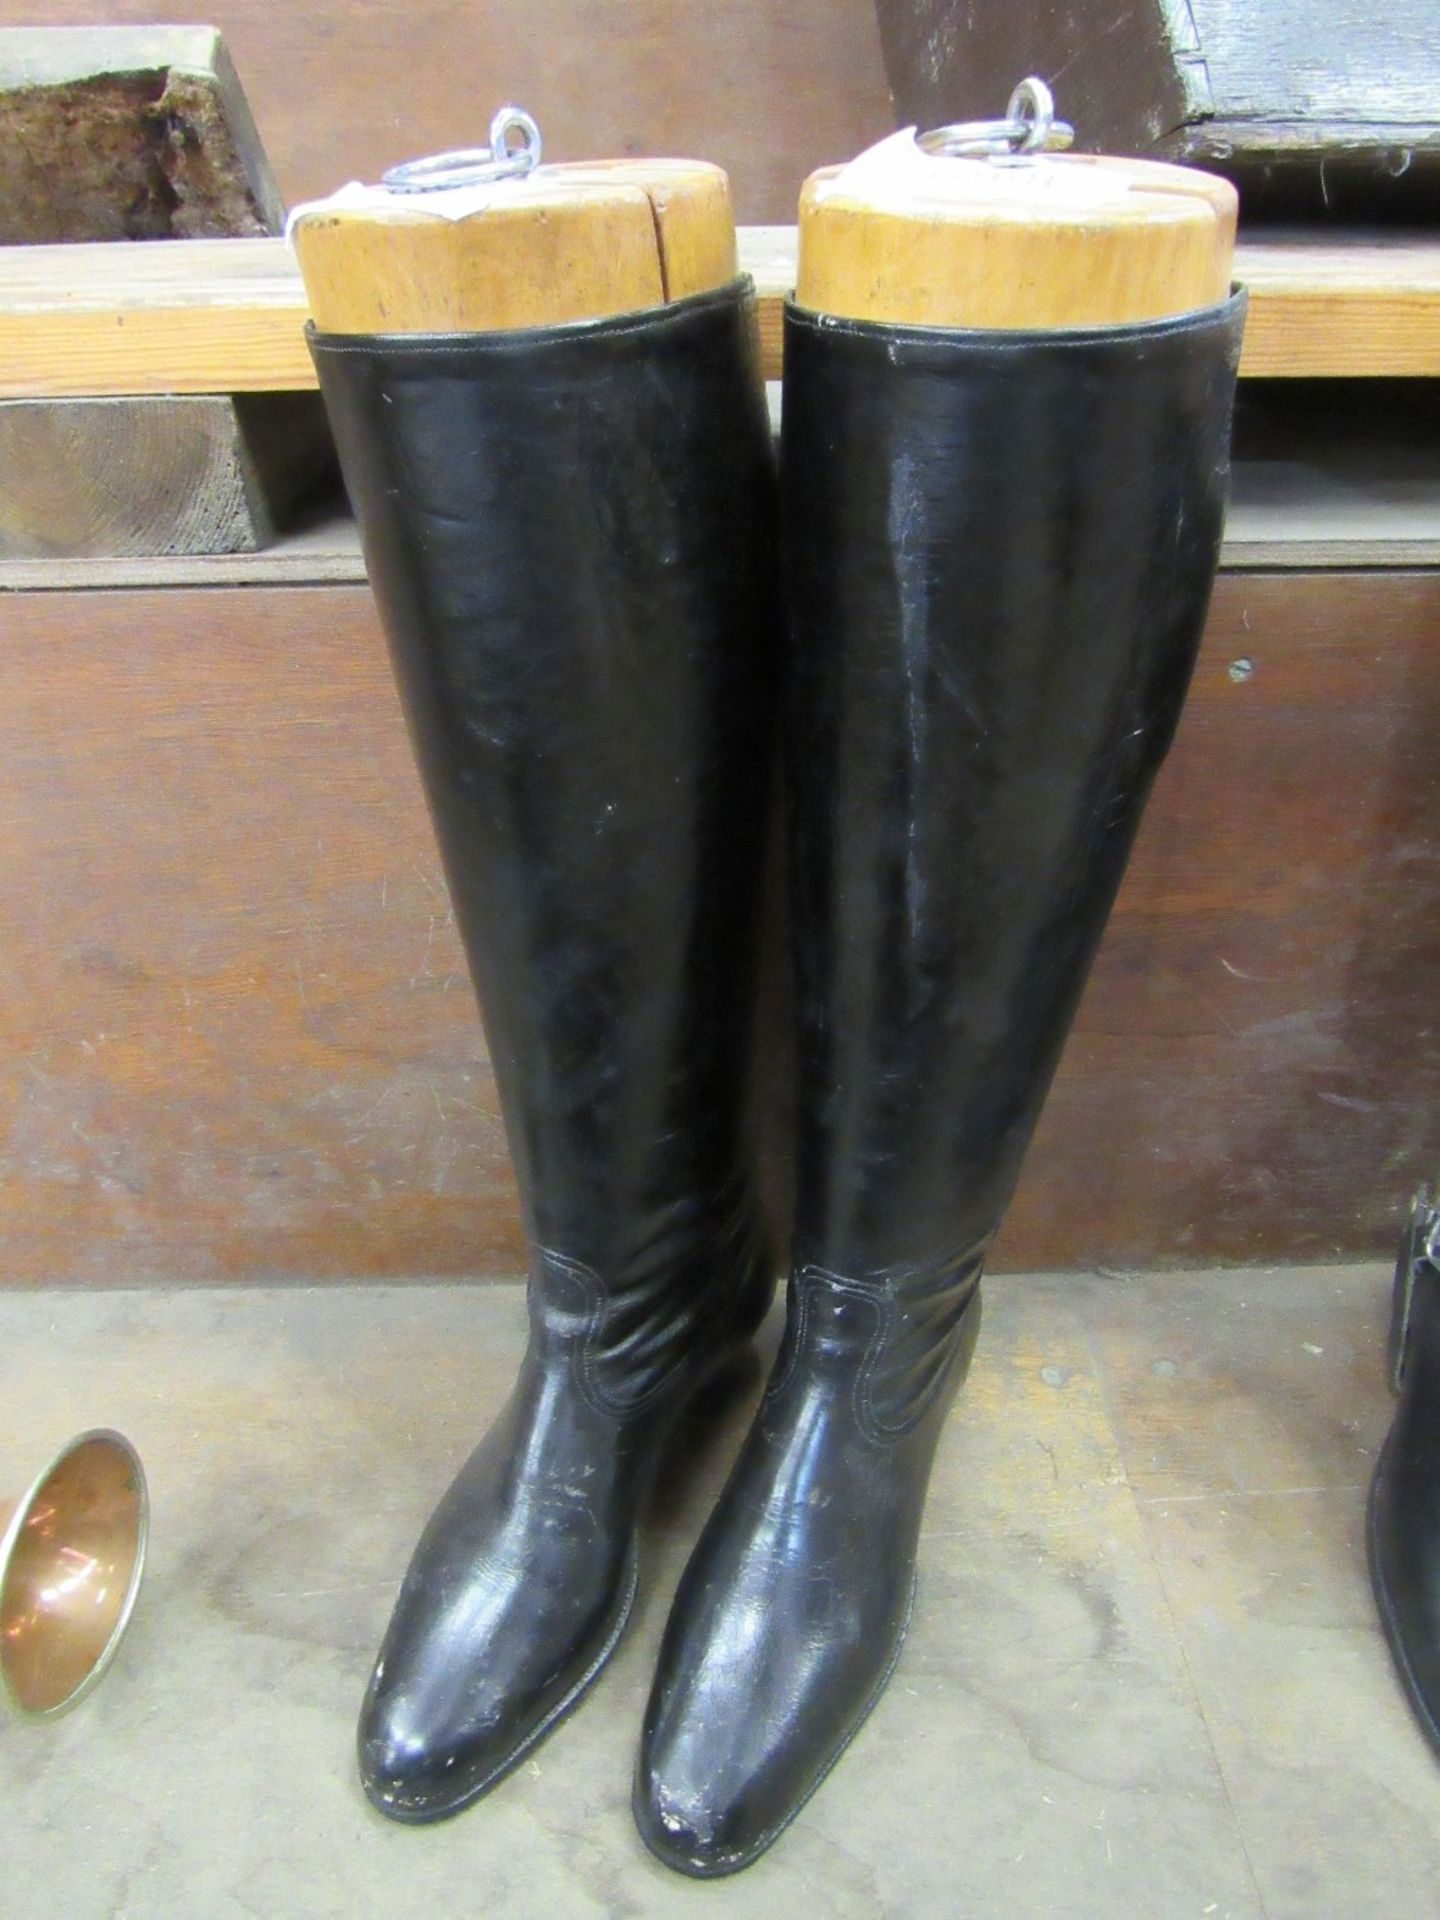 Pair of lady's side saddle boots with shaped heels and feet, complete with the original trees. In